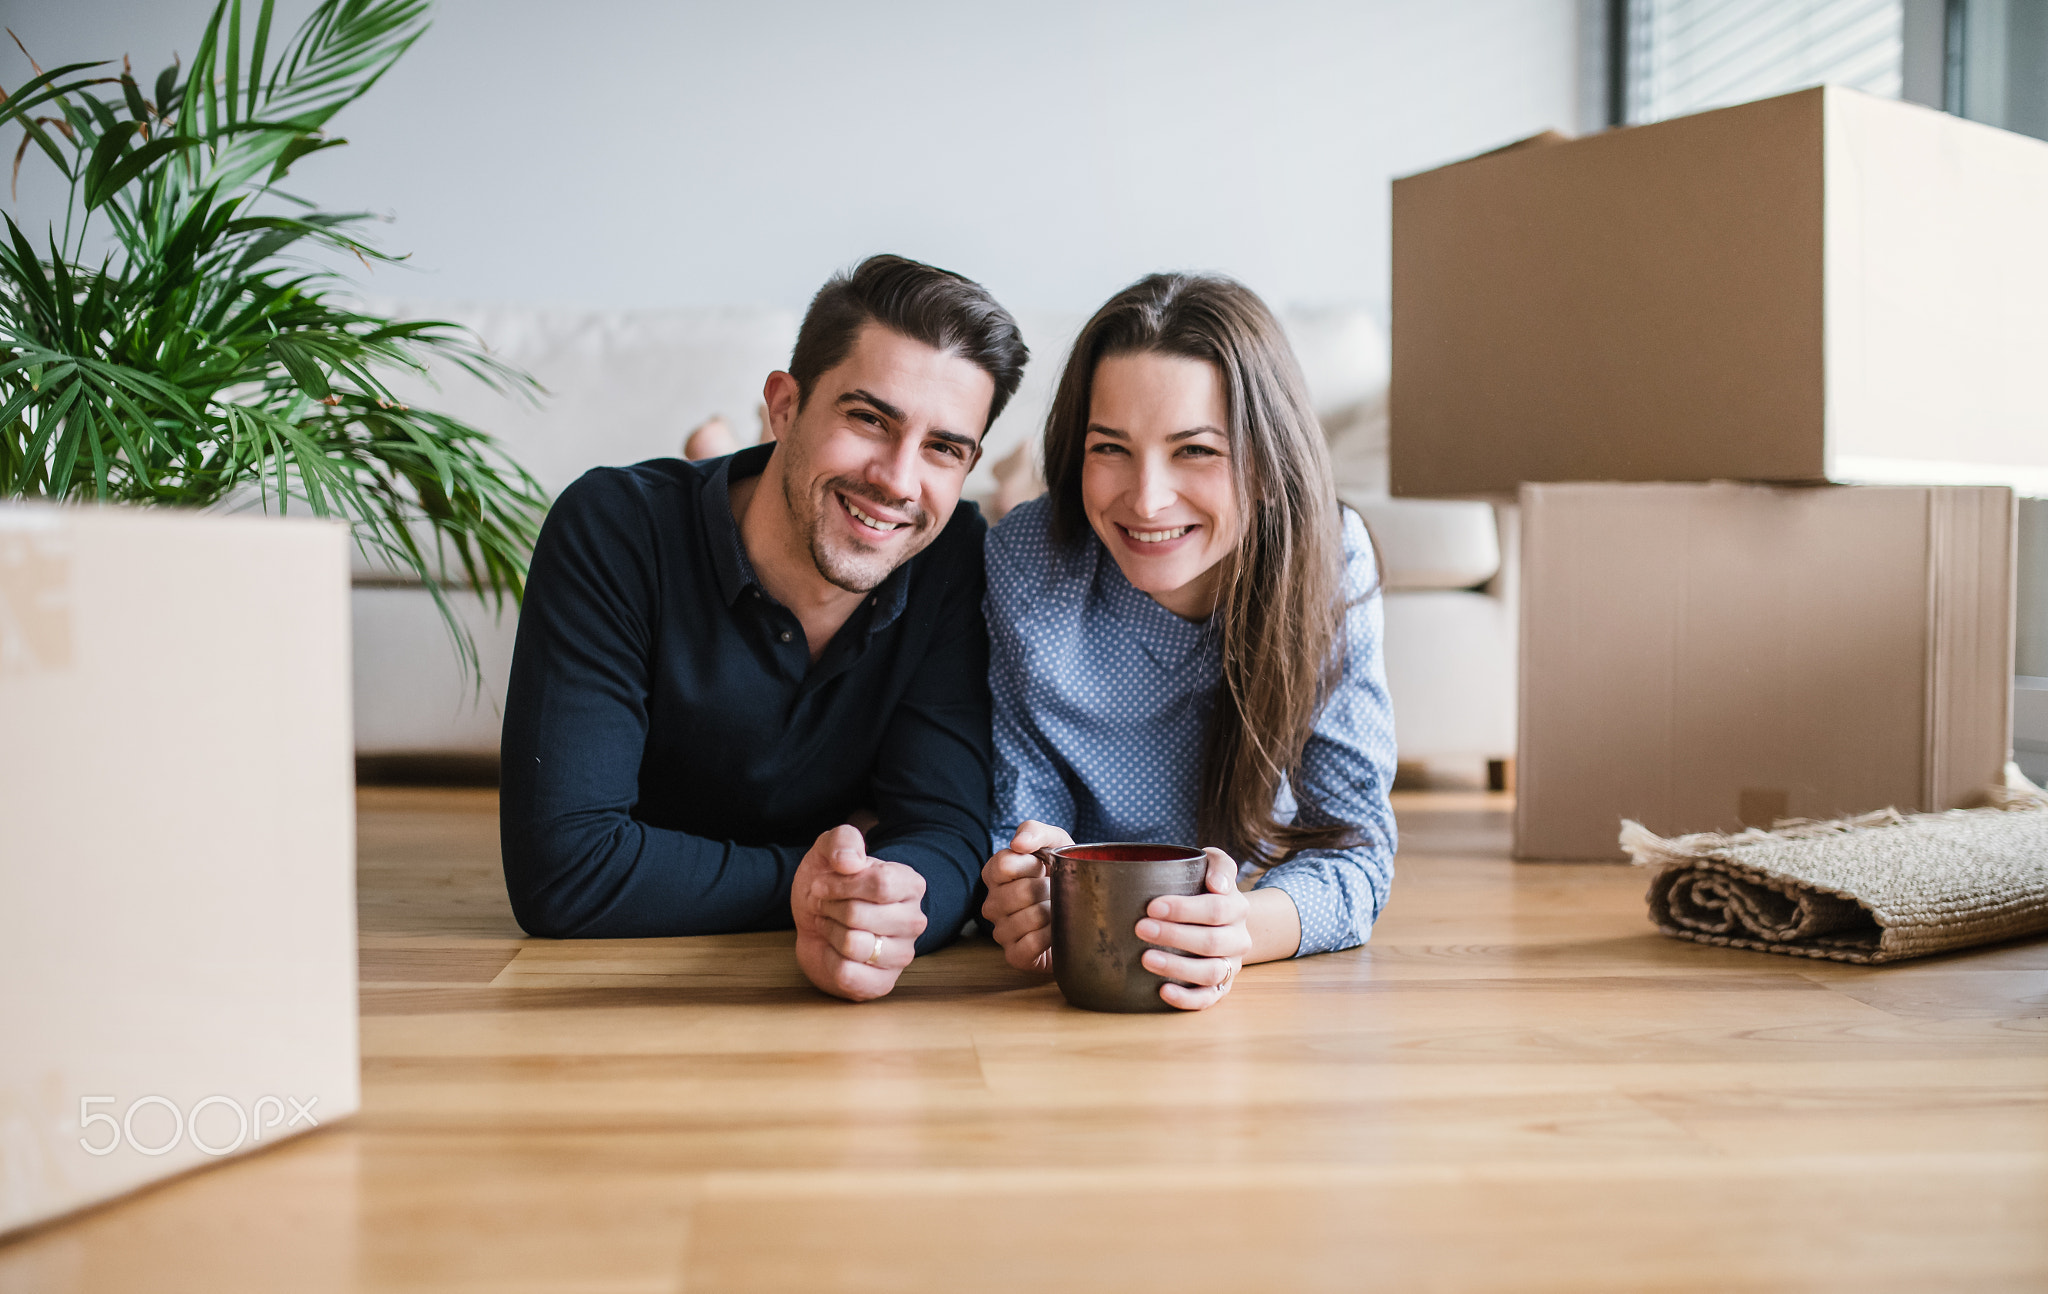 A young couple with a cup and cardboard boxes moving in a new home.